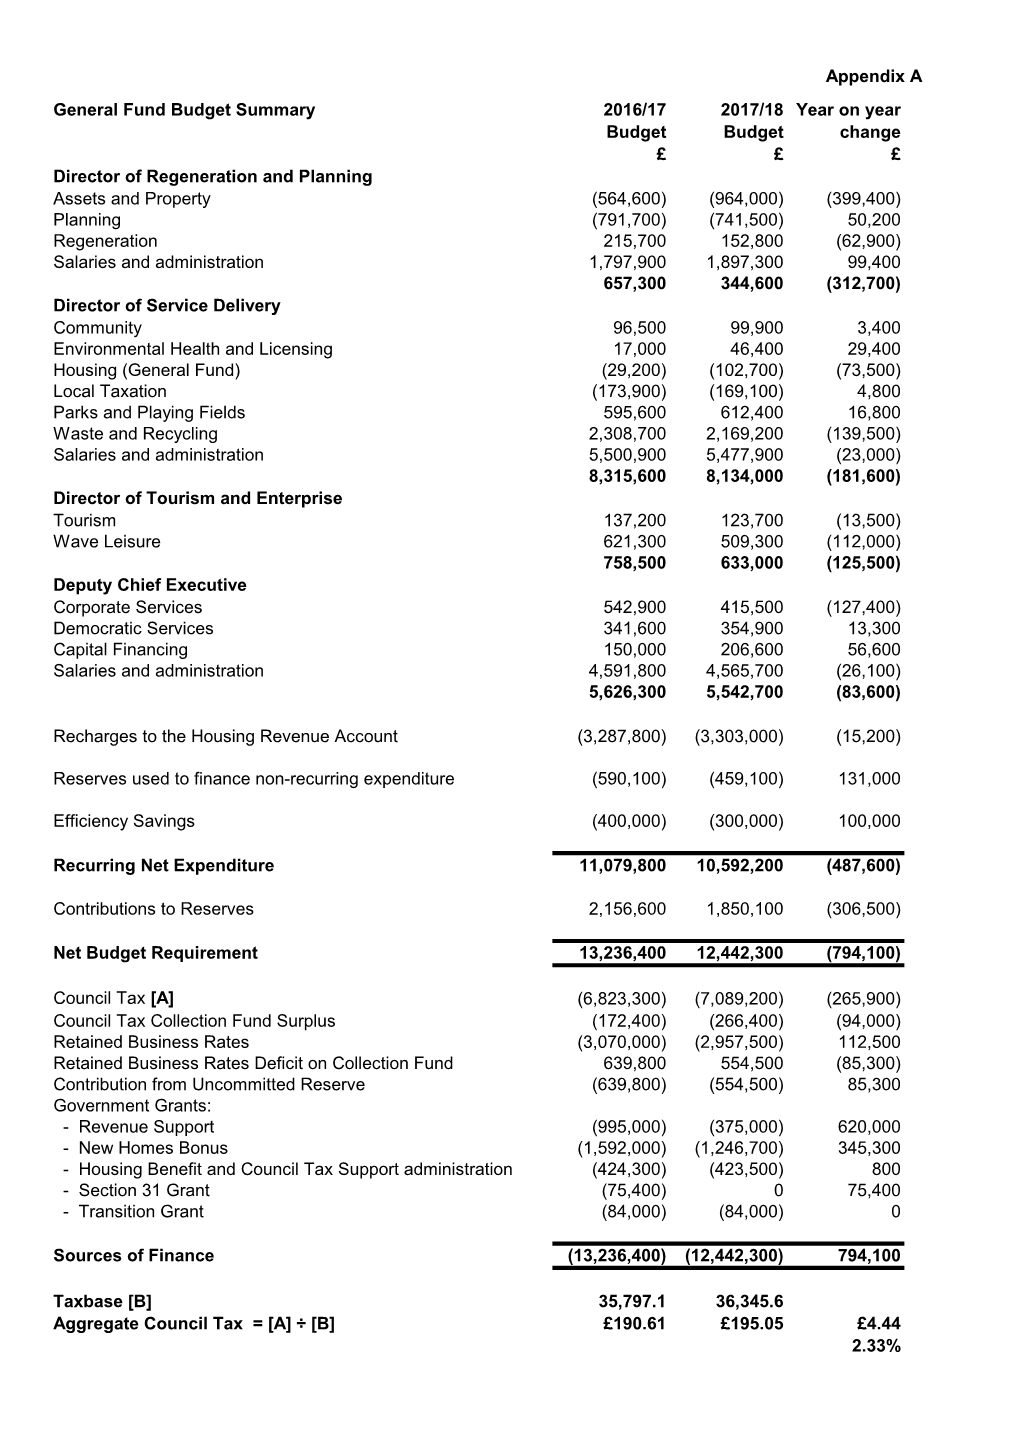 Appendix a General Fund Budget Summary 2016/17 2017/18 Year On